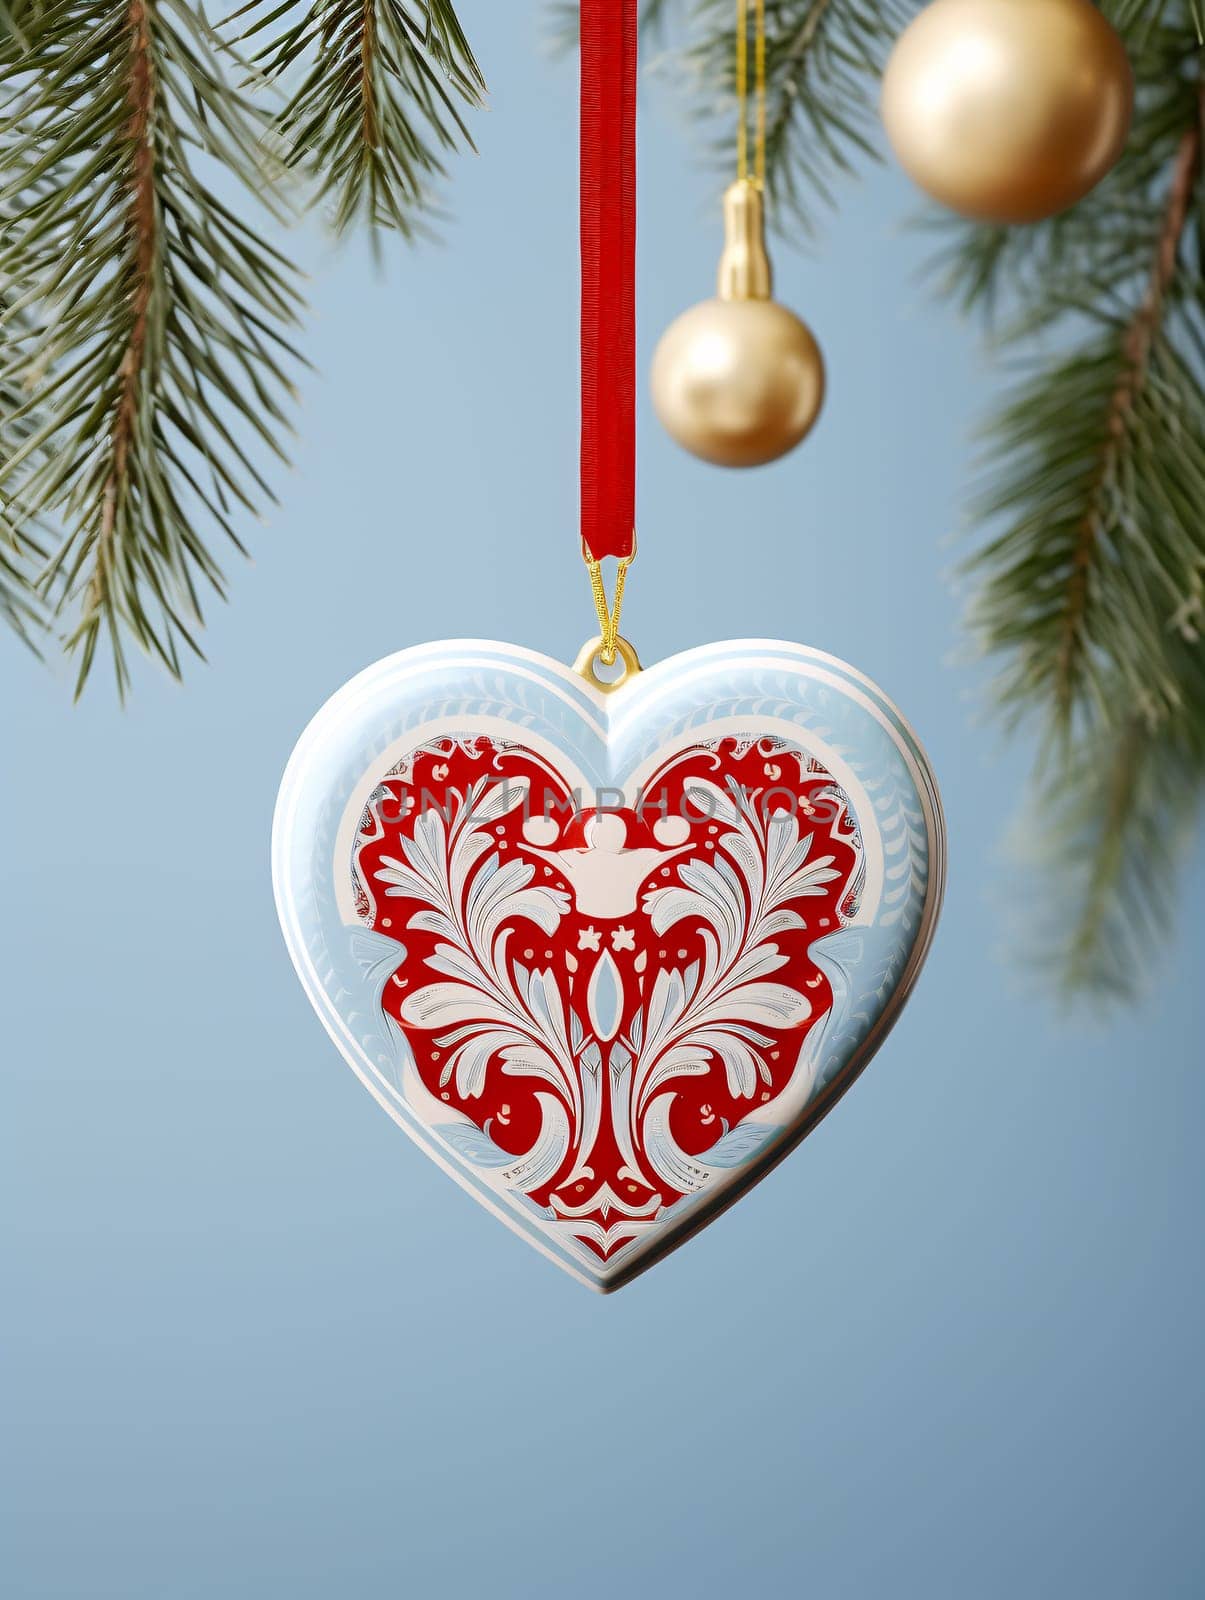 Elegant Red and White Heart Christmas Bauble by chrisroll